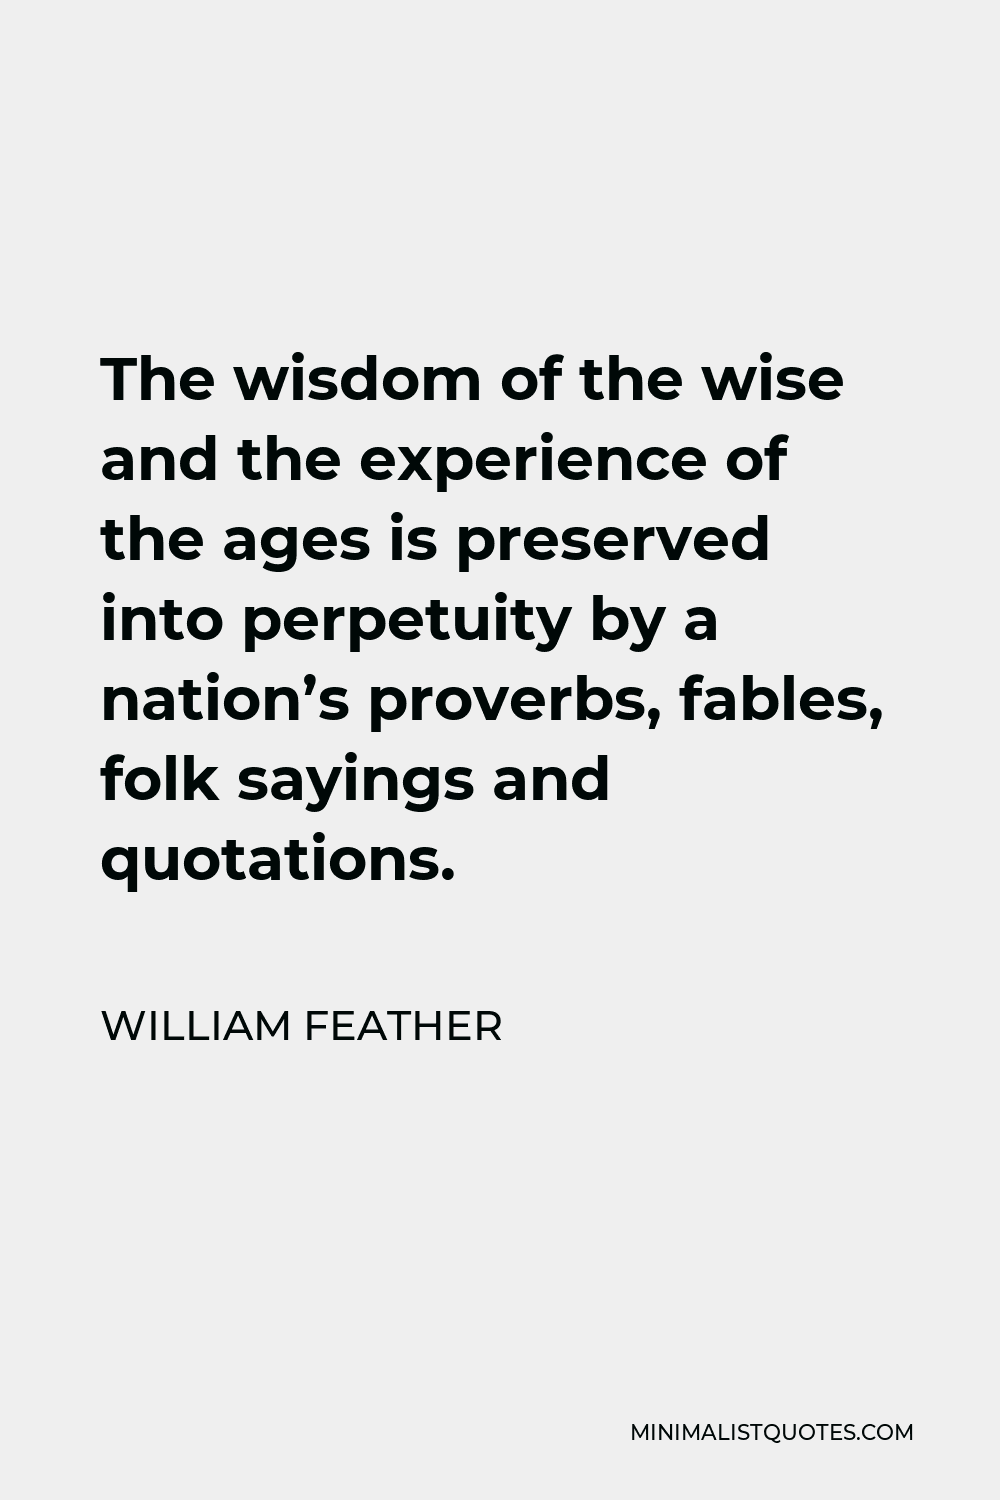 William Feather Quote - The wisdom of the wise and the experience of the ages is preserved into perpetuity by a nation’s proverbs, fables, folk sayings and quotations.